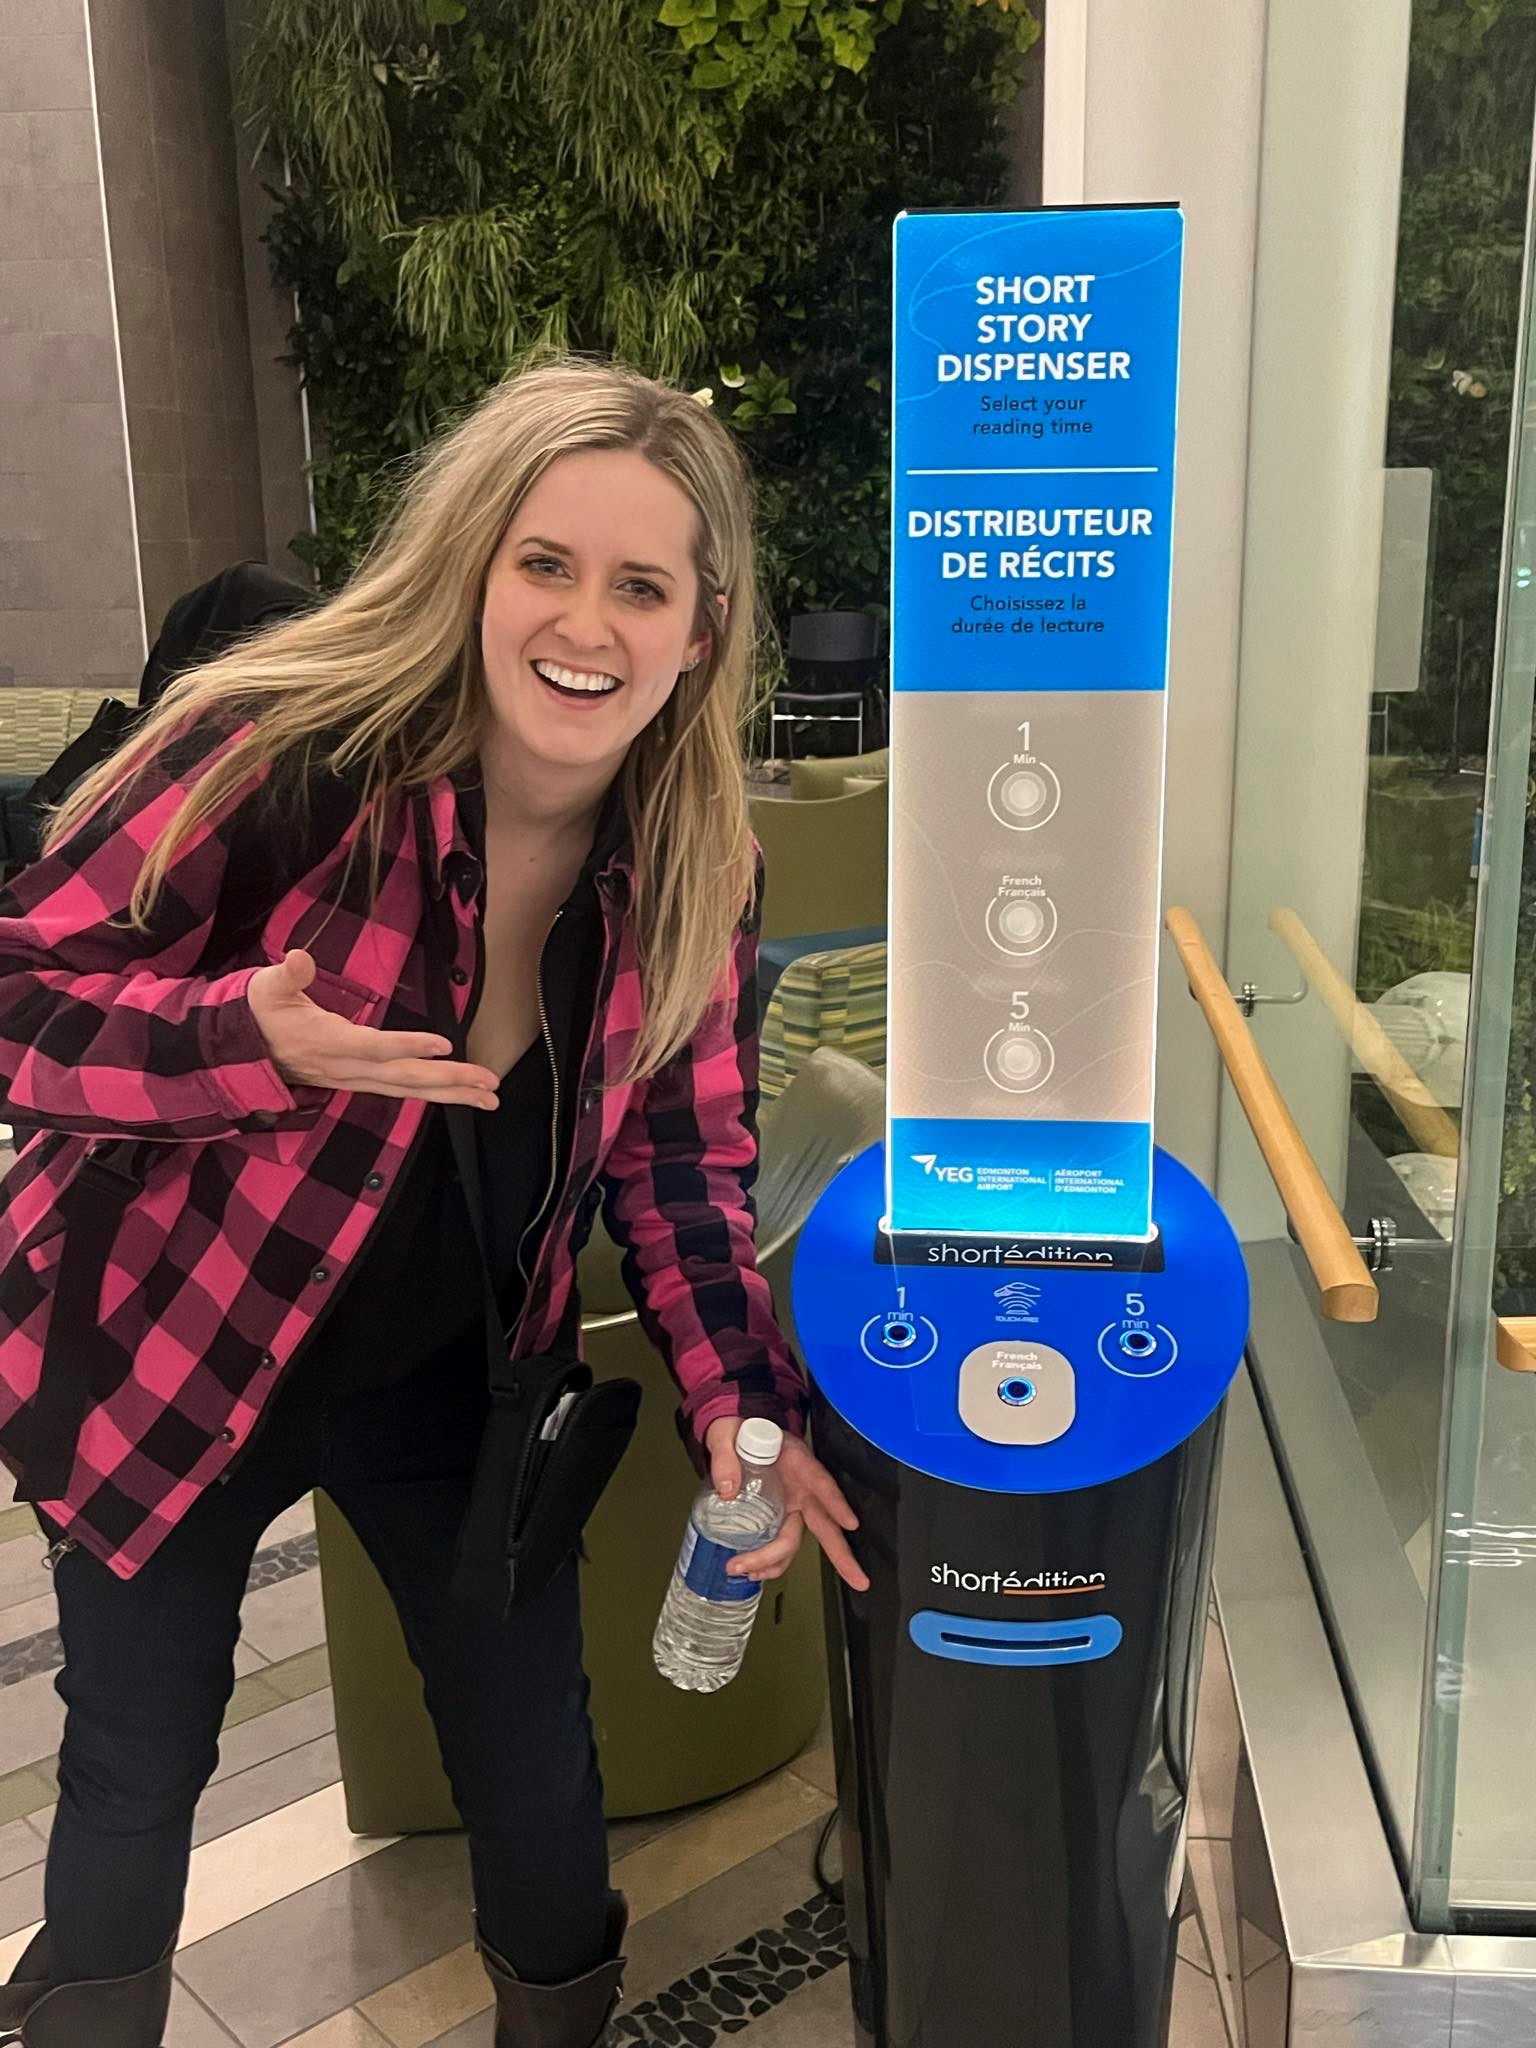 Smiling woman in plaid shirt points to the Short Story Dispenser at Edmonton International Airport 